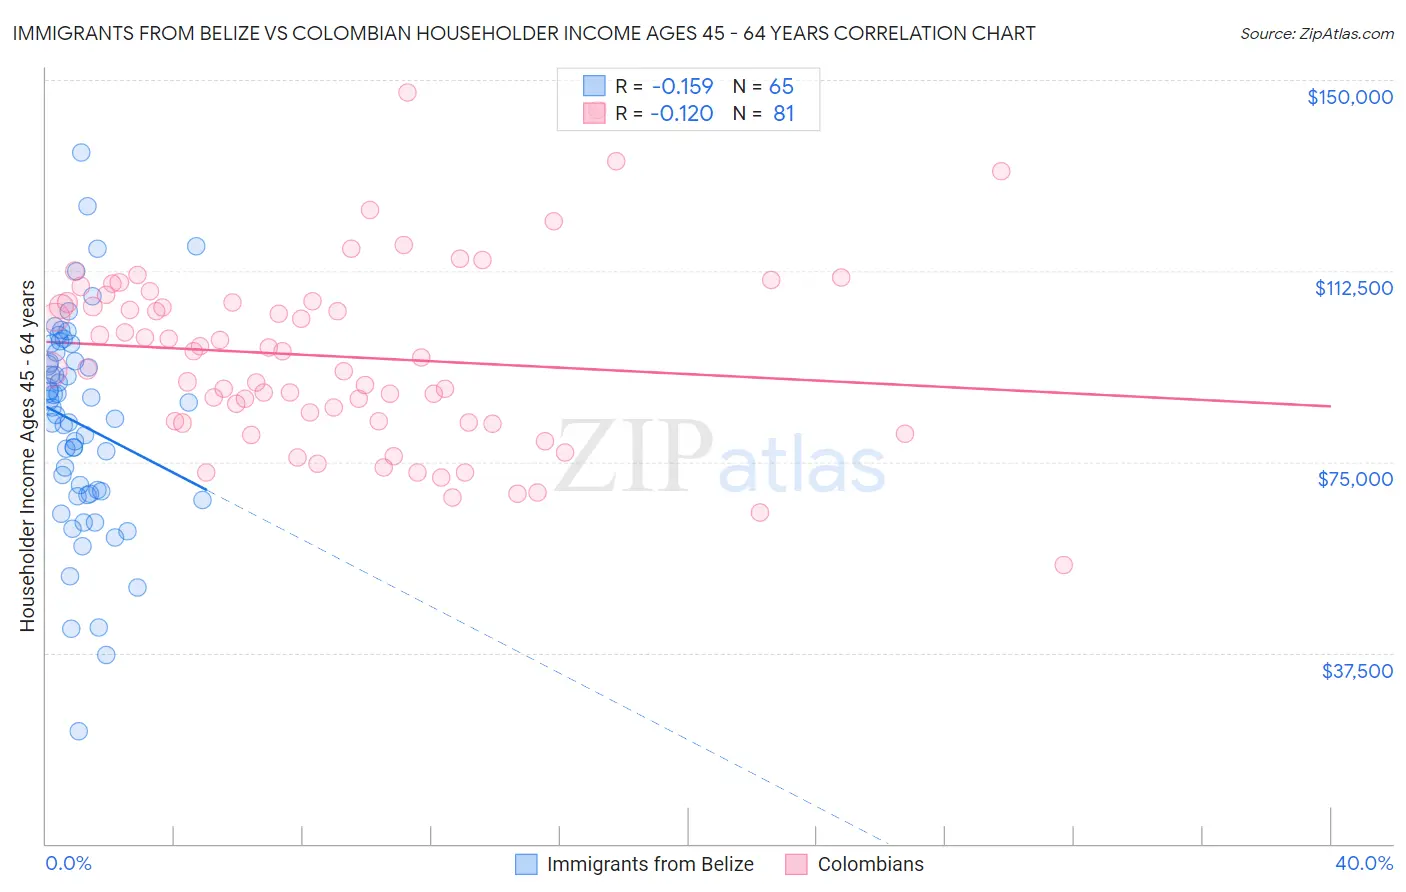 Immigrants from Belize vs Colombian Householder Income Ages 45 - 64 years